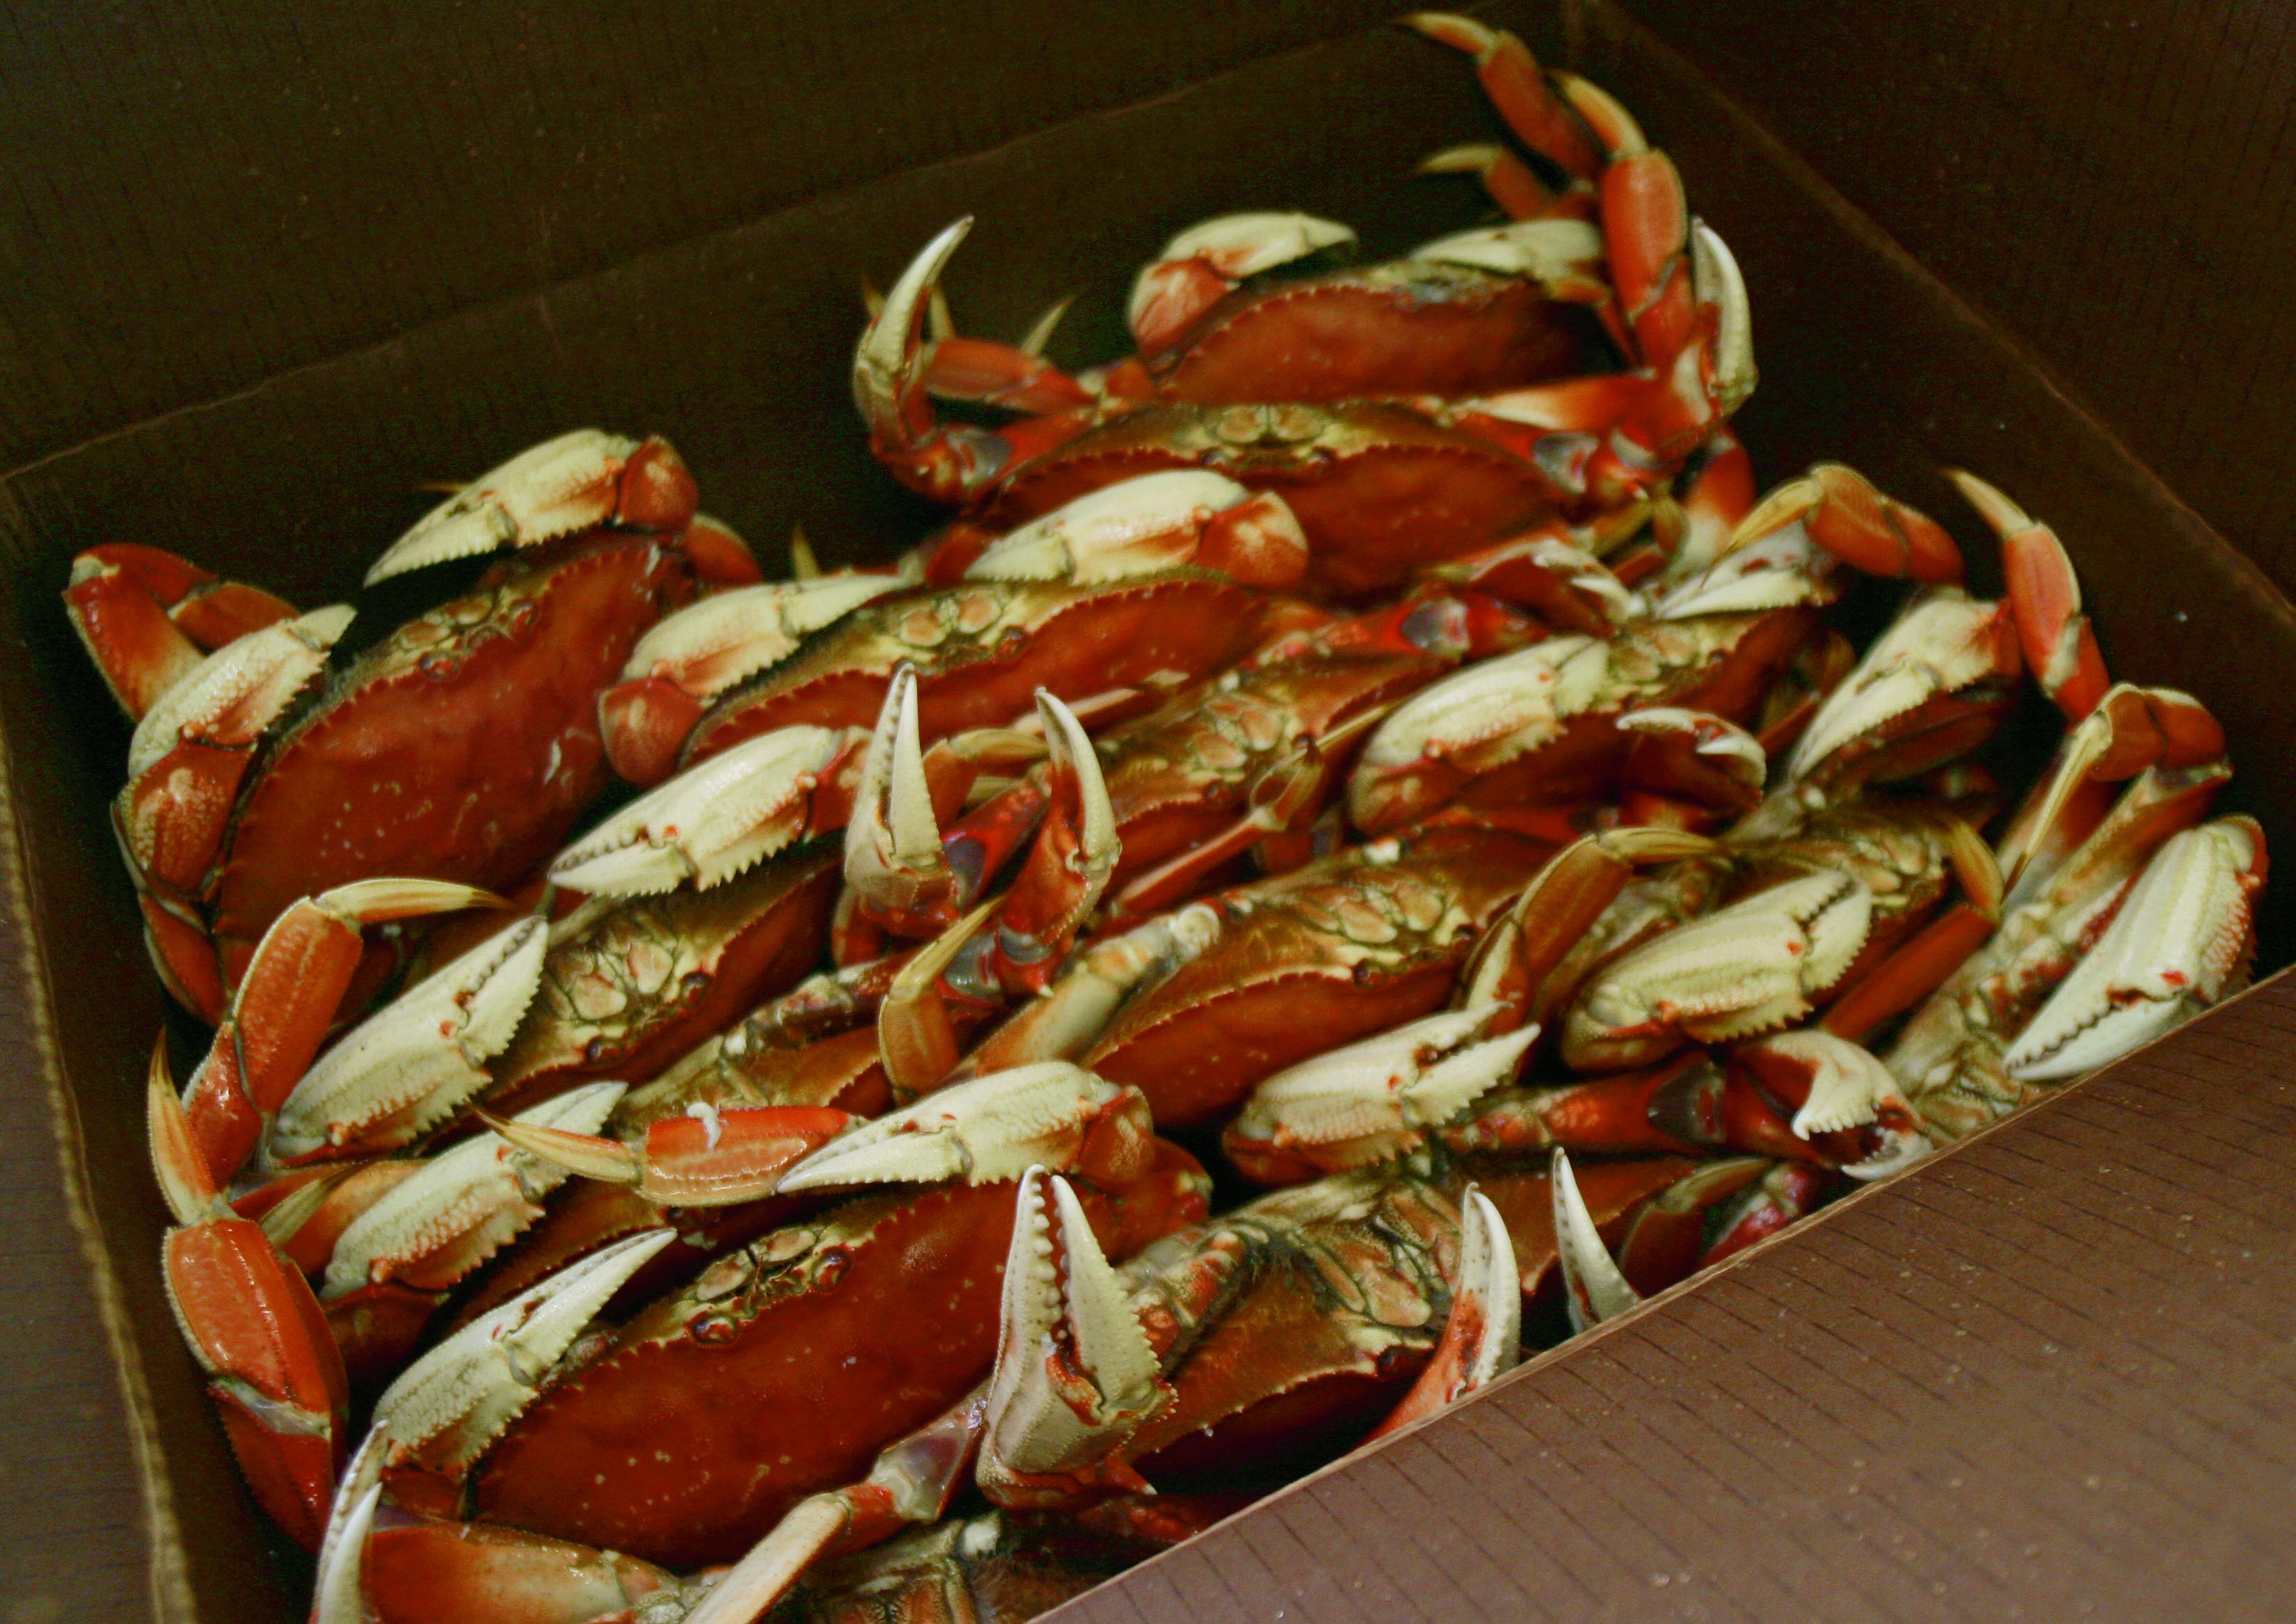 Northern California Dungeness Crab Meat Recovery Rates Show Incremental Growth